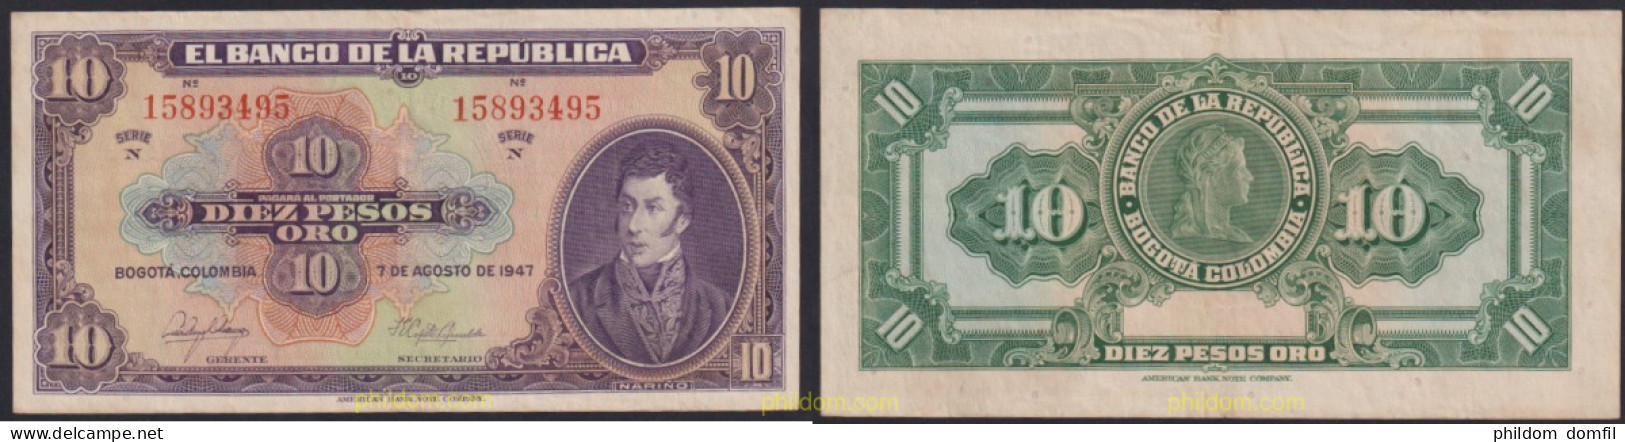 4338 COLOMBIA 1947 COLOMBIA 10 PESOS 1947 - Colombia